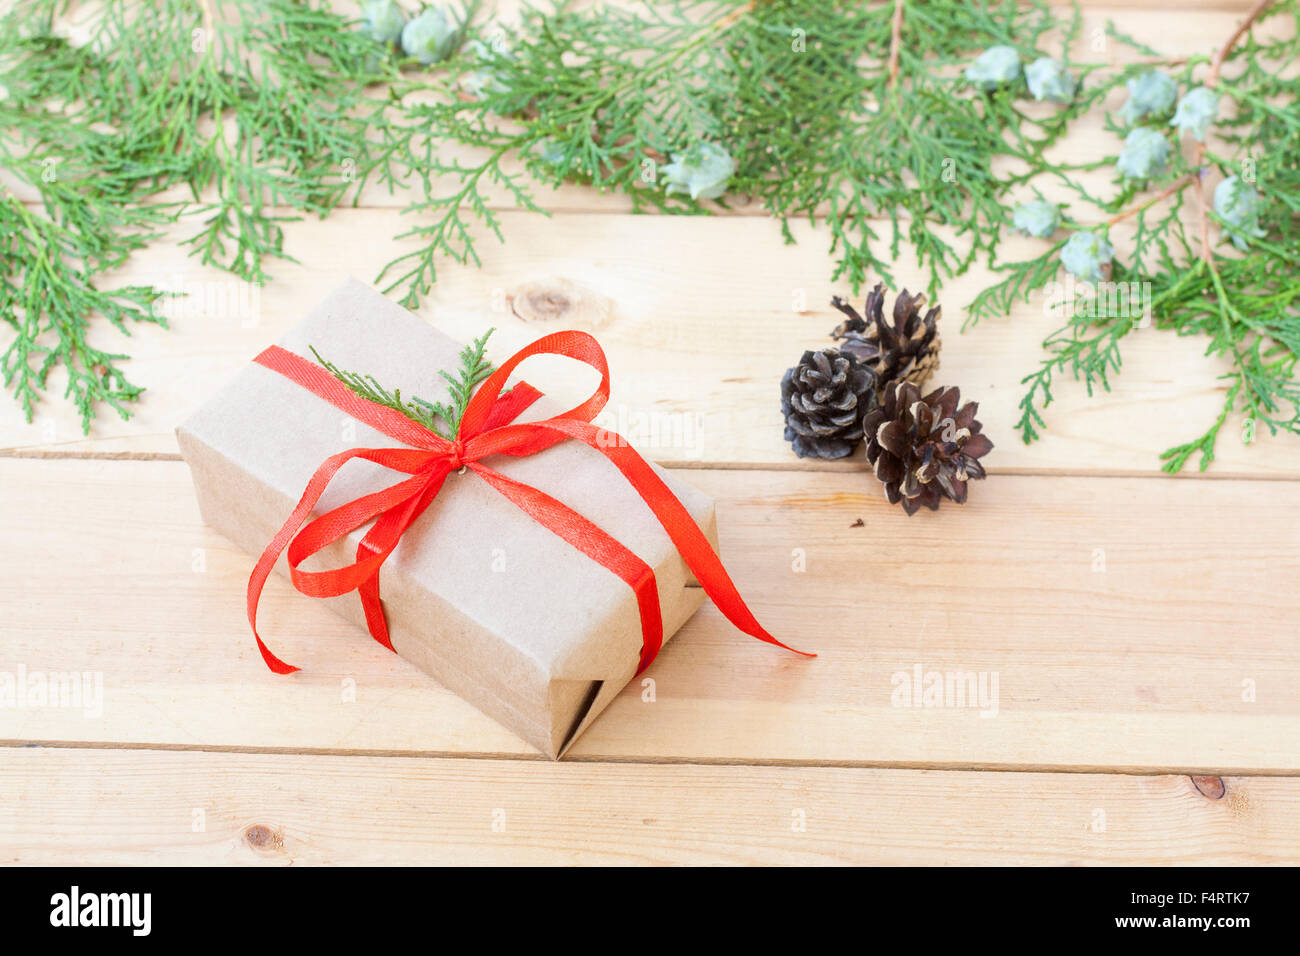 Christmas Gift, nuts, cones and green arborvitae branch on a wooden table Stock Photo